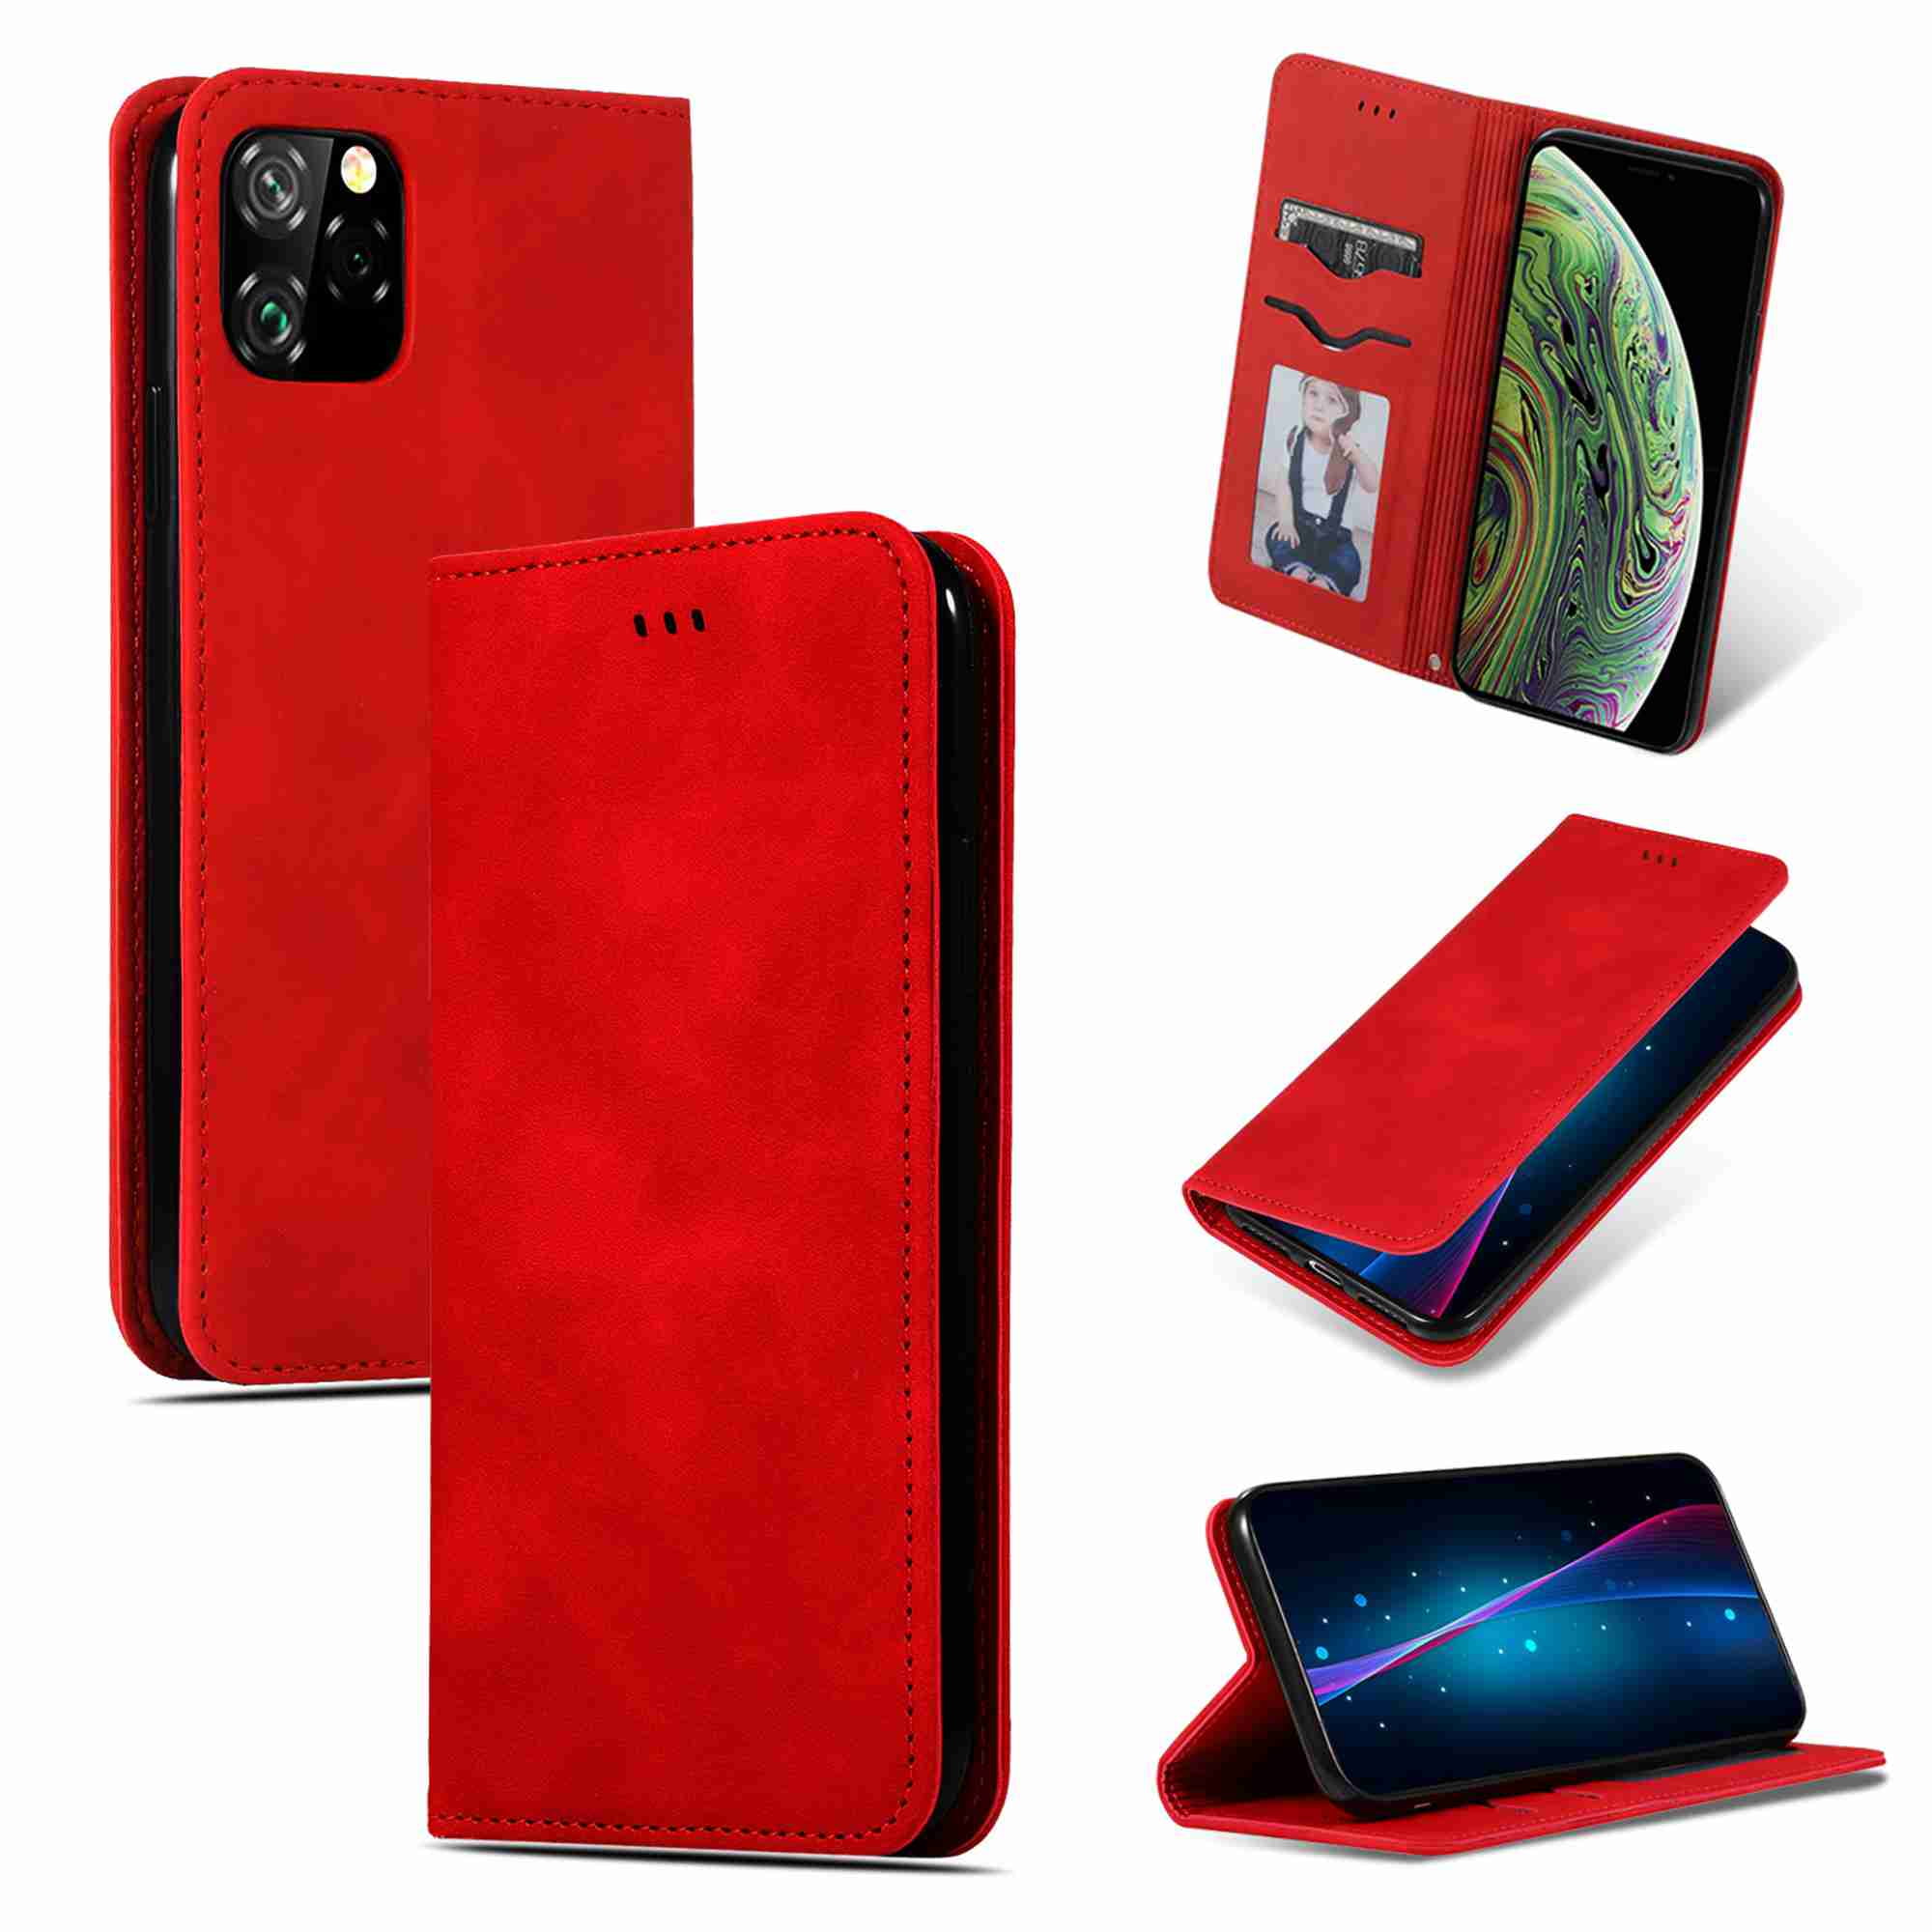 Cover for Leather Kickstand Wallet Cover Extra-Shockproof Business Card Holders Flip Cover iPhone 11 Flip Case 